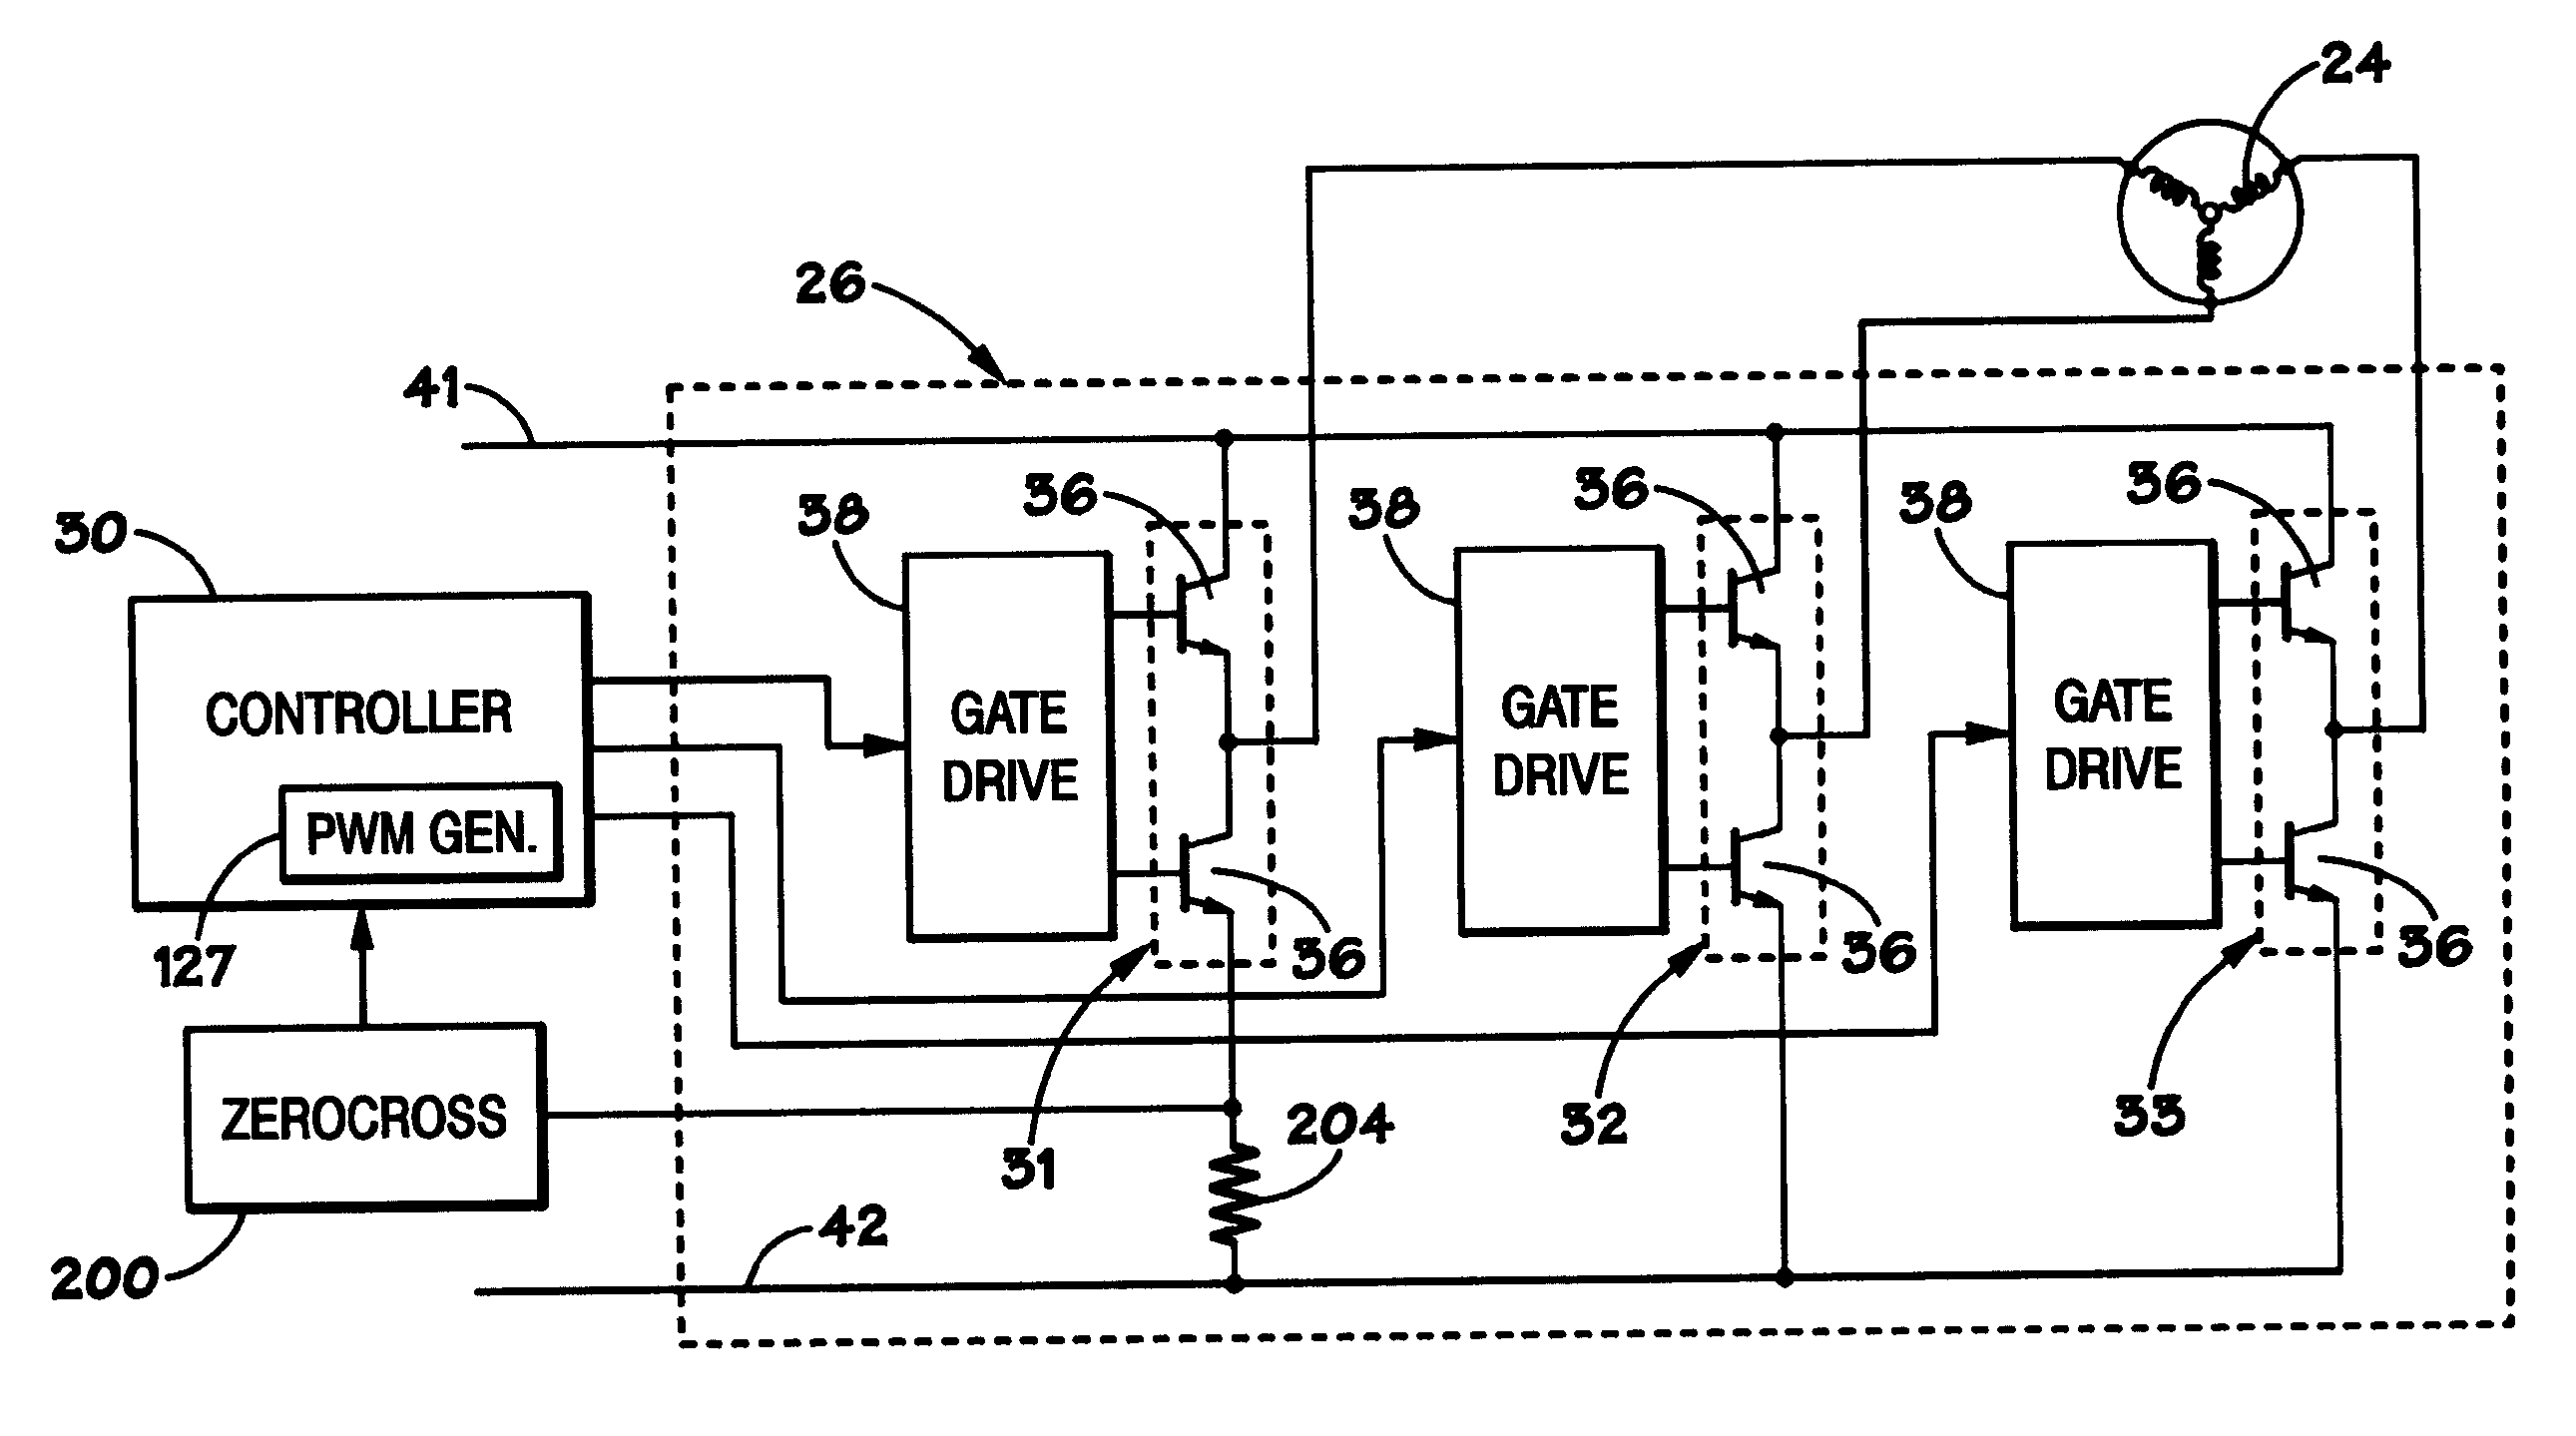 Induction motor control system